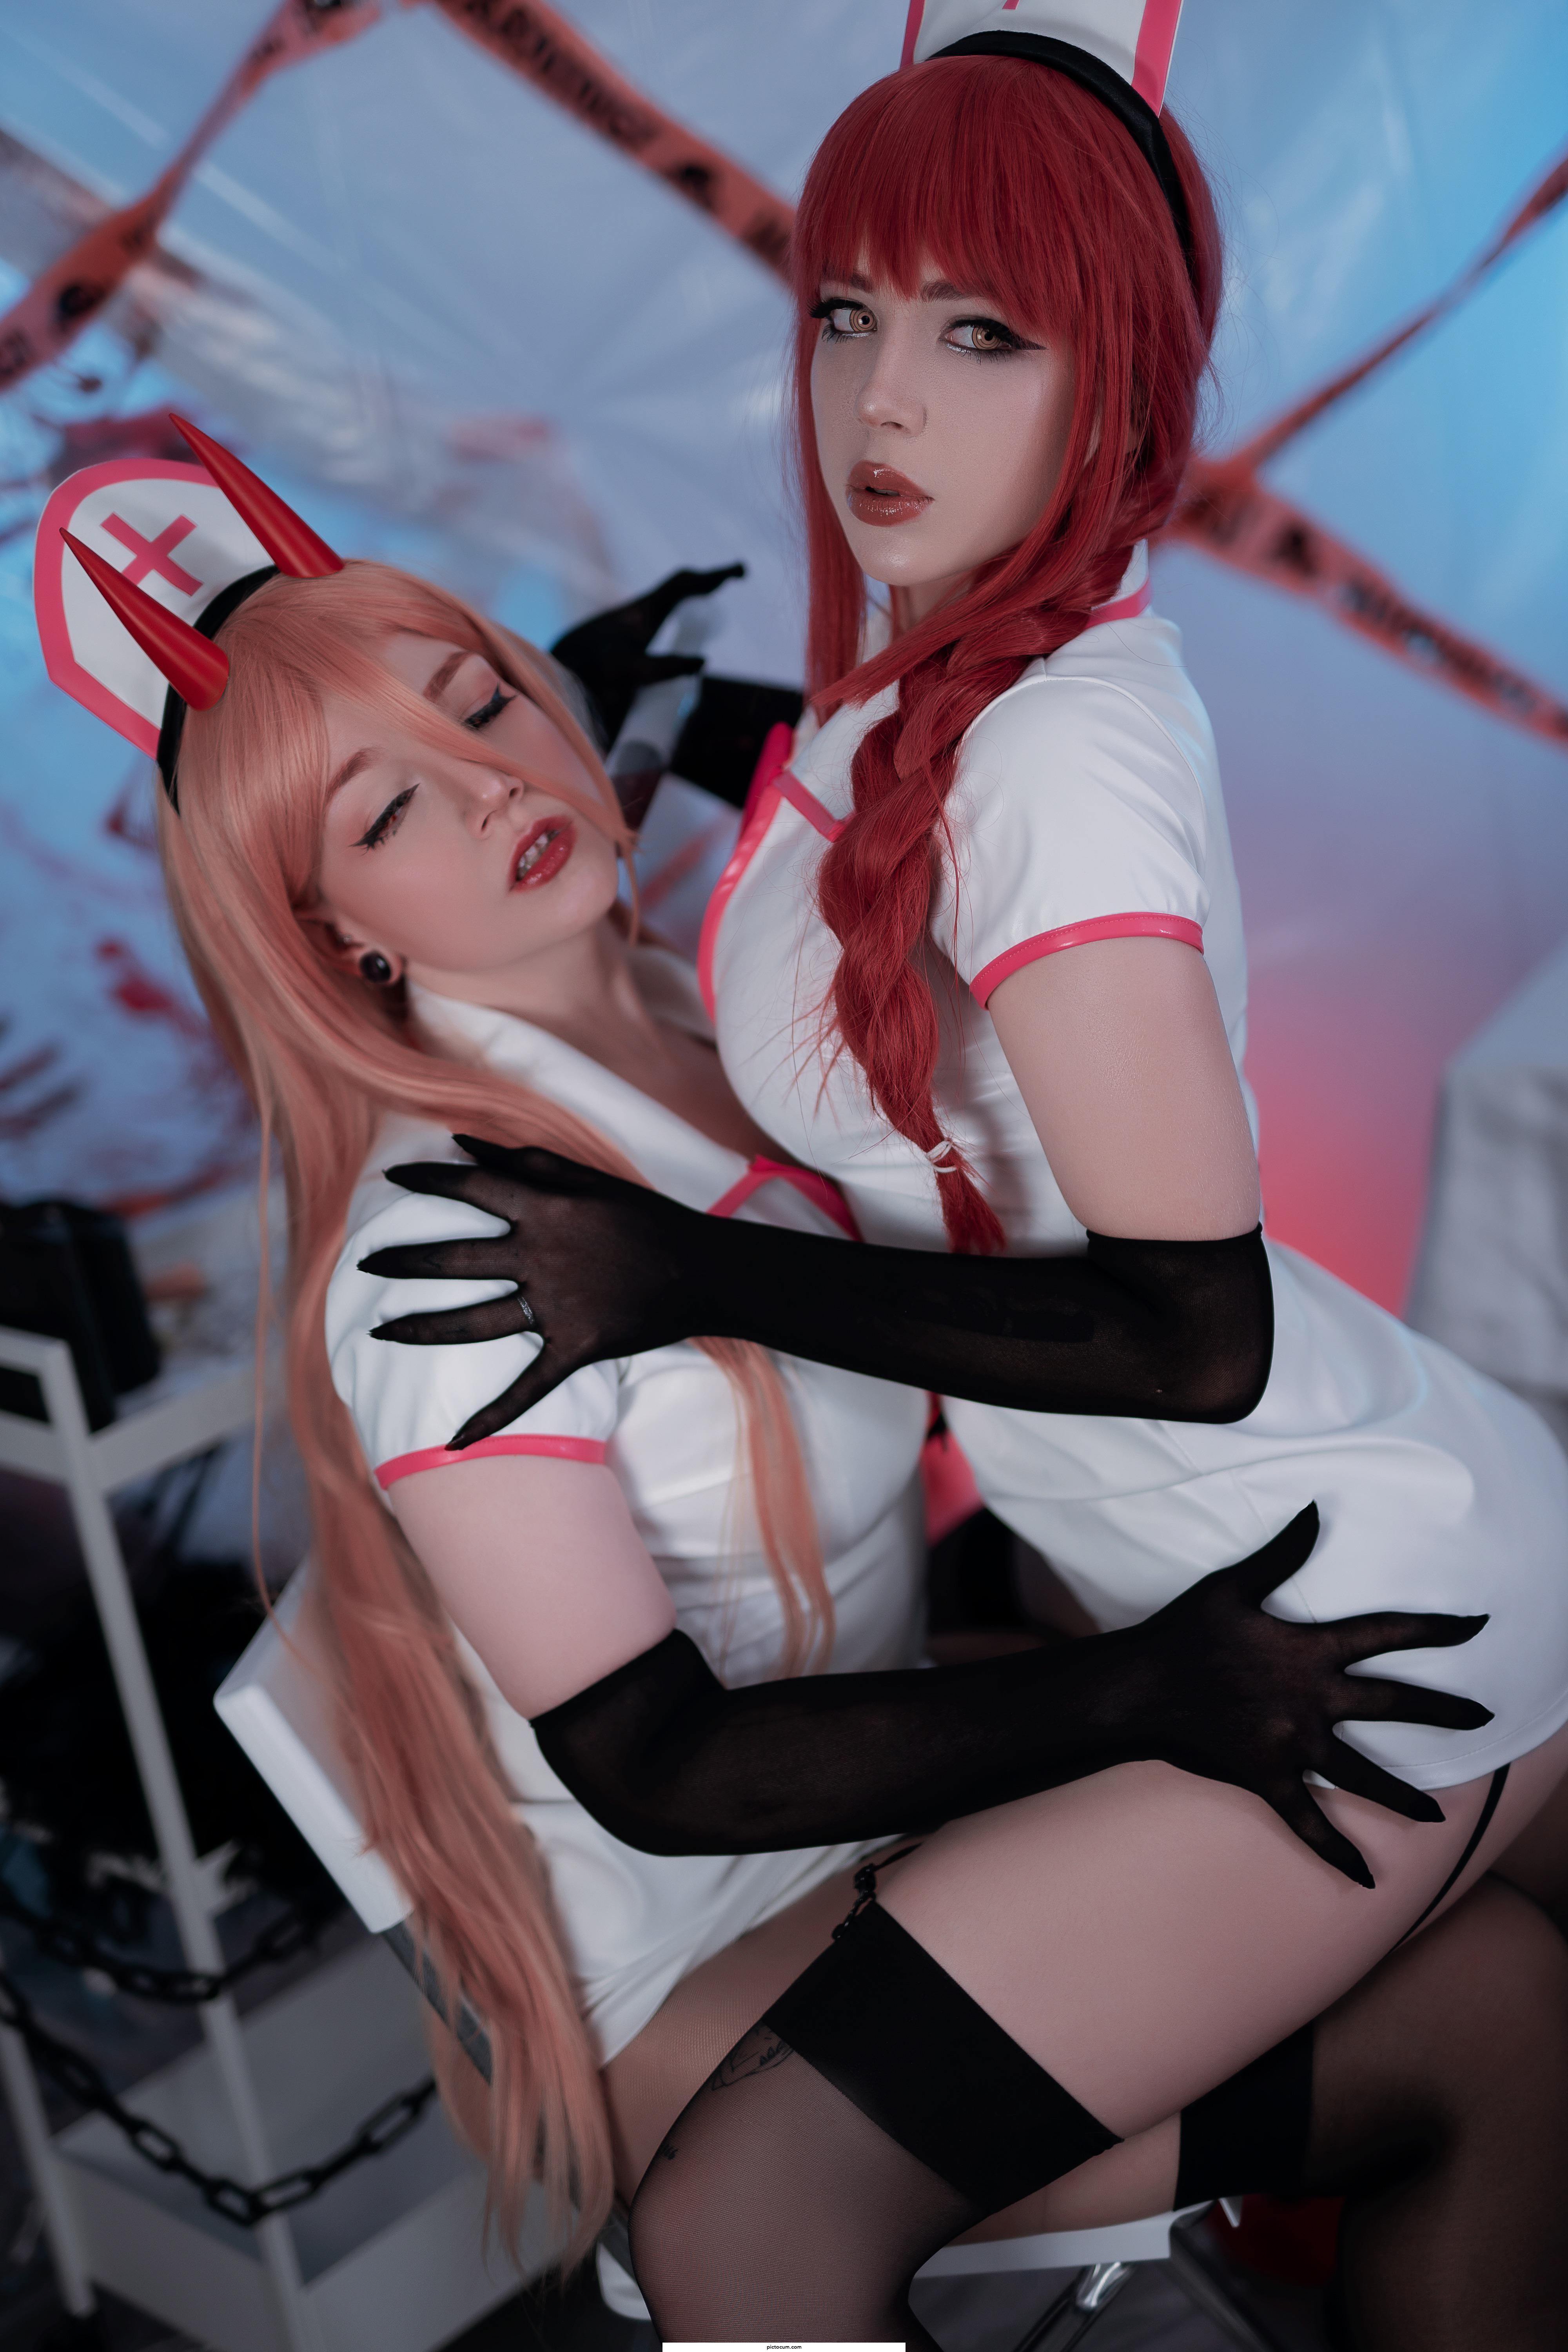 Hi ! Wanted to share with you our Makima and power Nurse cosplay ! Makima cosplay by Xly_luu Power cosplay by Cookiiemii